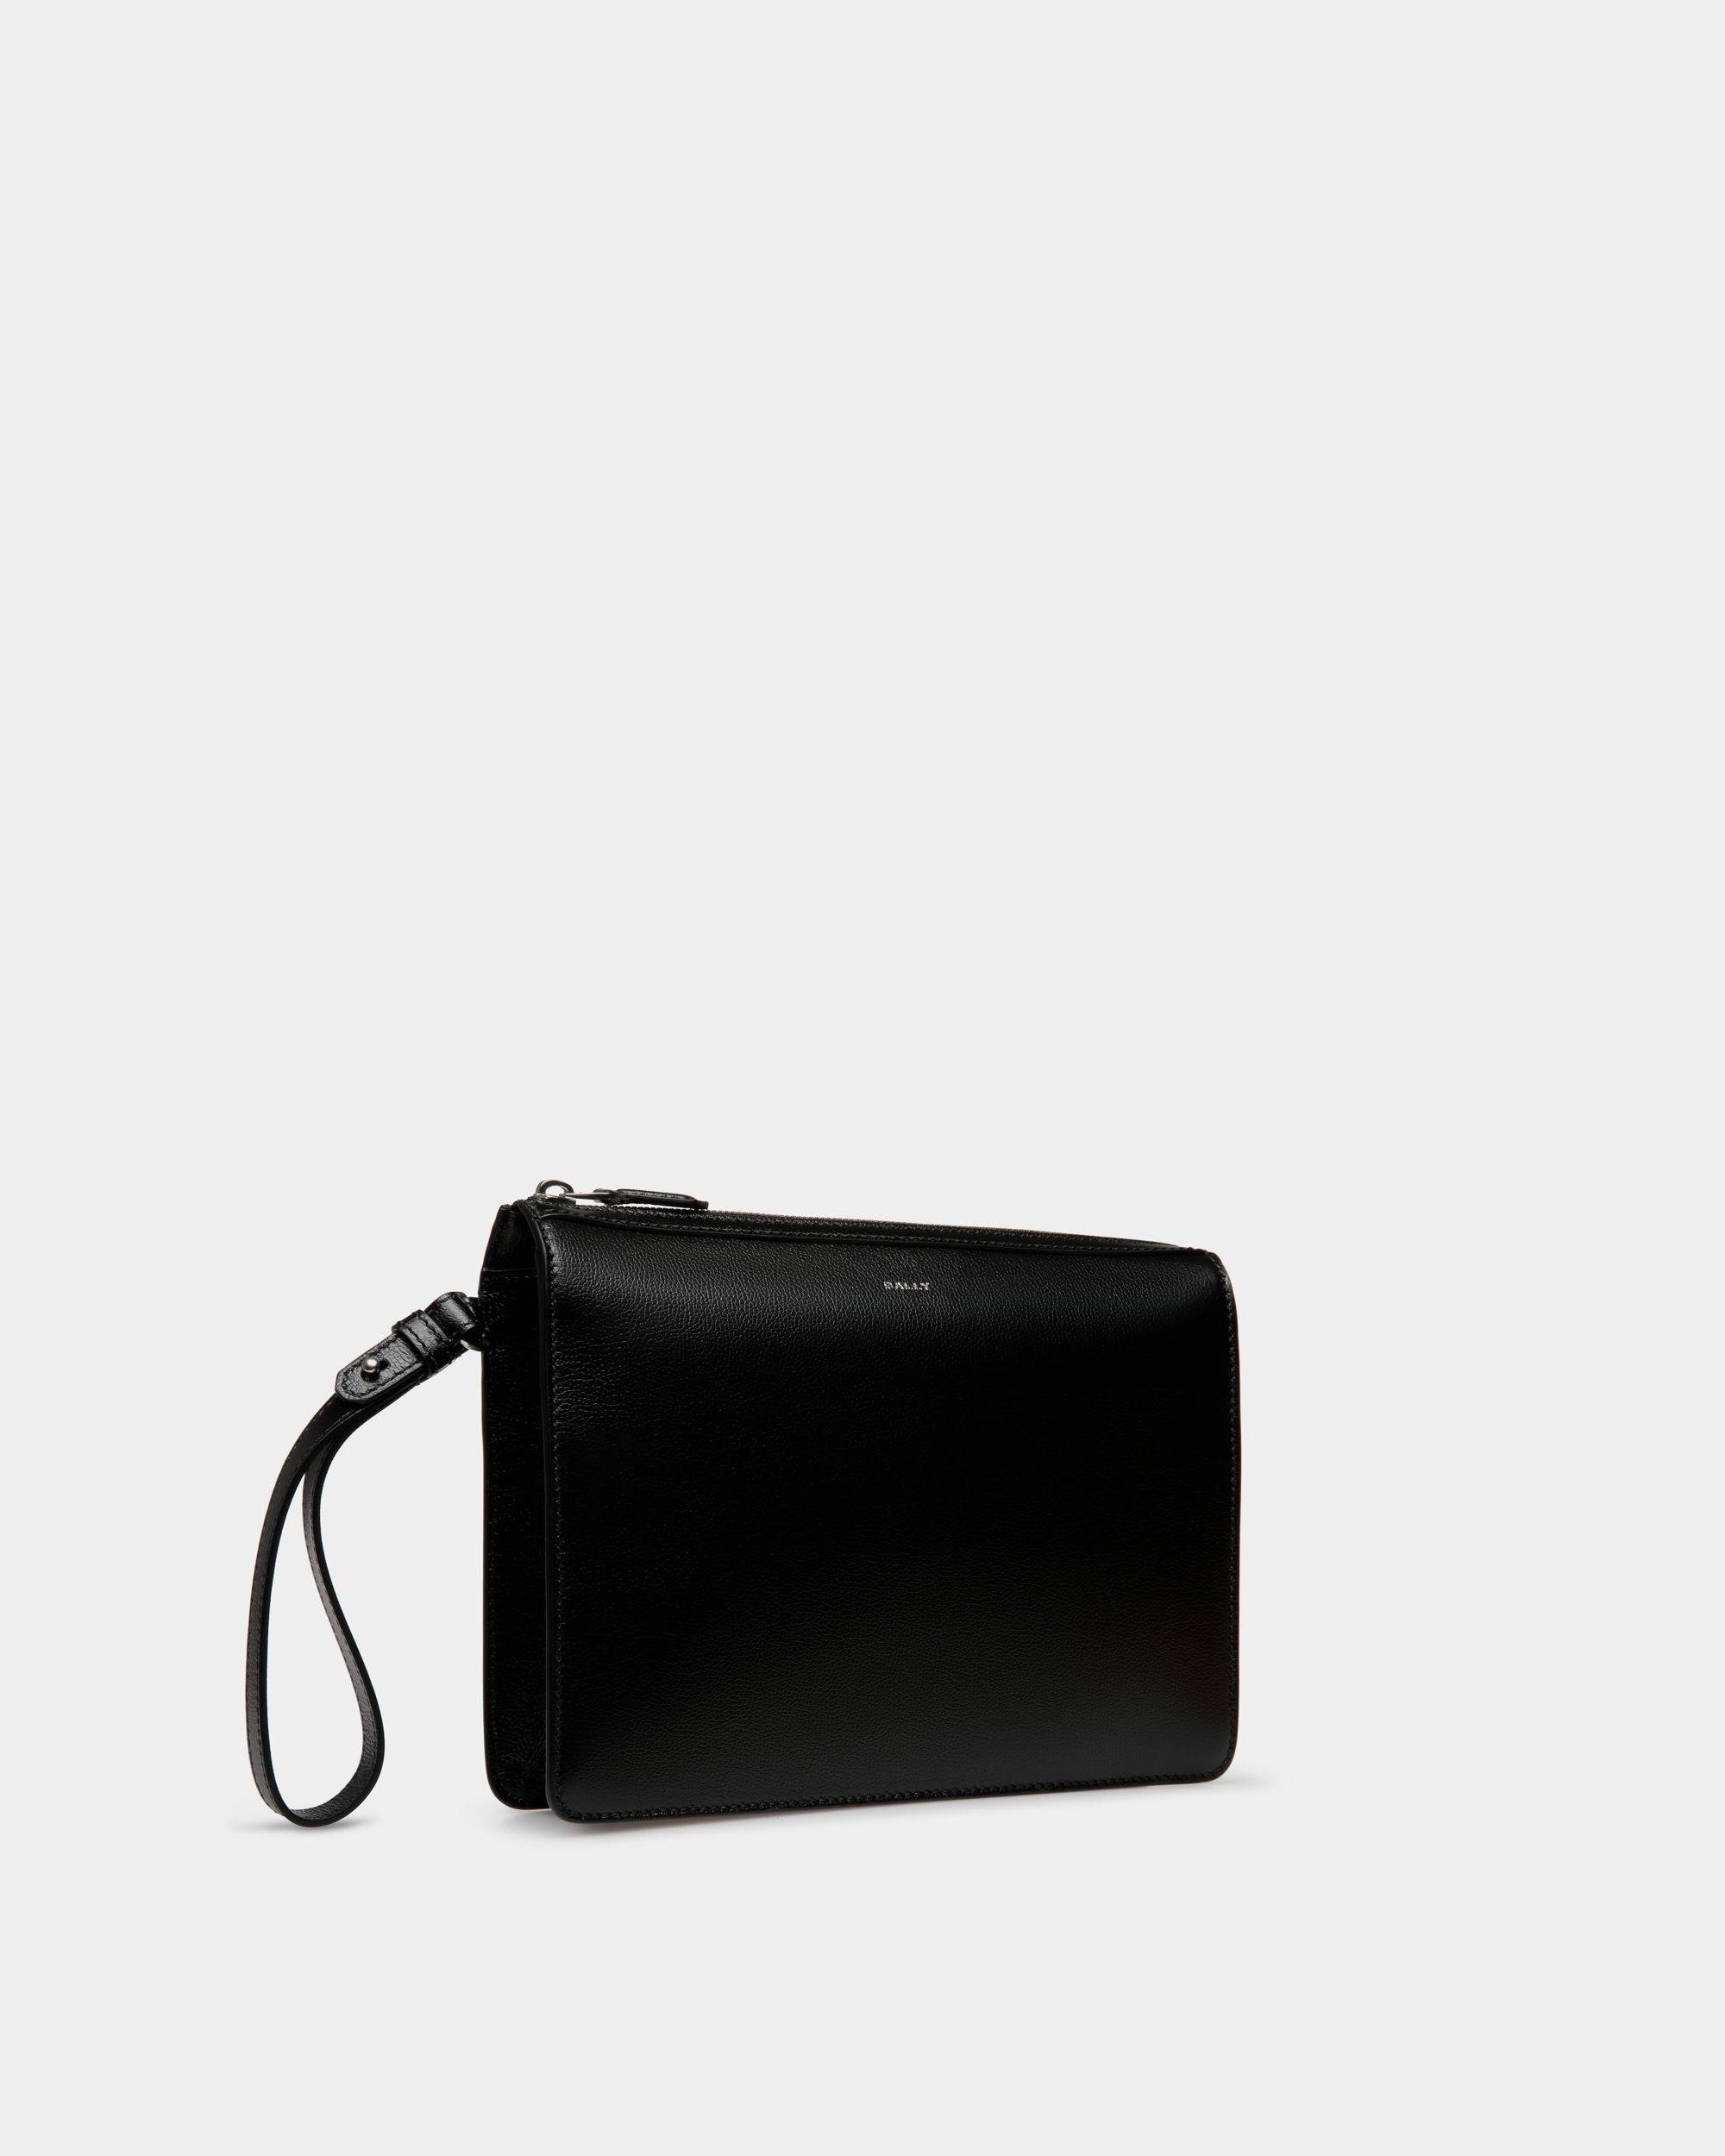 PM | Men's Clutches And Portfolios | Black Leather | Bally | Still Life 3/4 Front